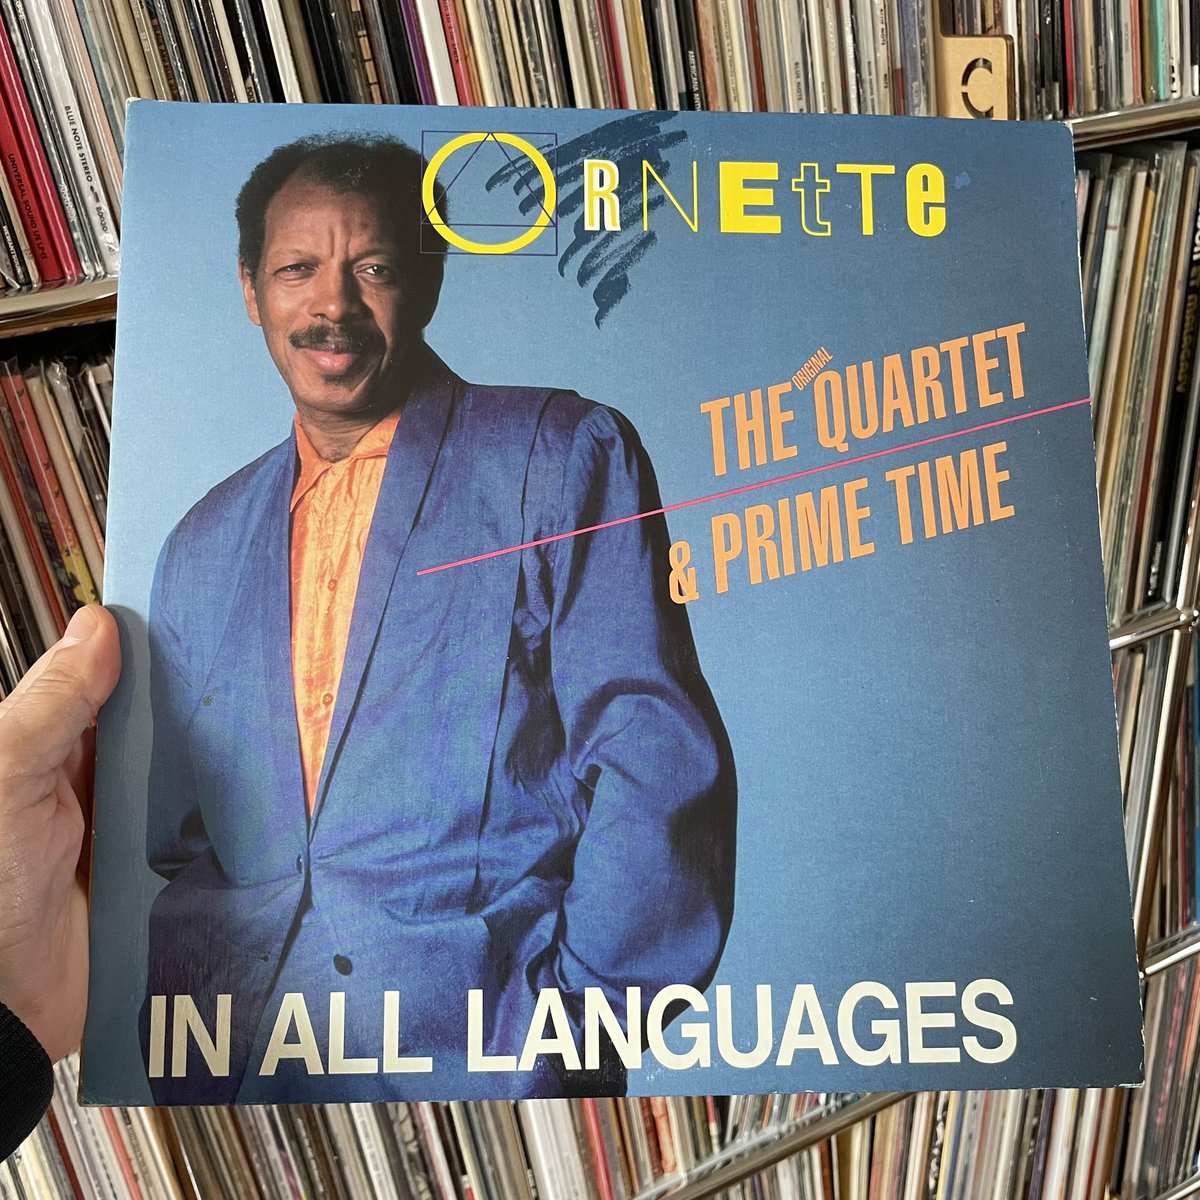 #NowPlaying Ornette Coleman : The Original Quartet & Prime Time - In All Languages (Caravan Of Dreams Productions, 1987).

On the first LP #OrnetteColeman has a reunion with his original quartet (Don Cherry, Charlie Haden & Billy Higgins) and on the 2d LP he plays with Prime Time